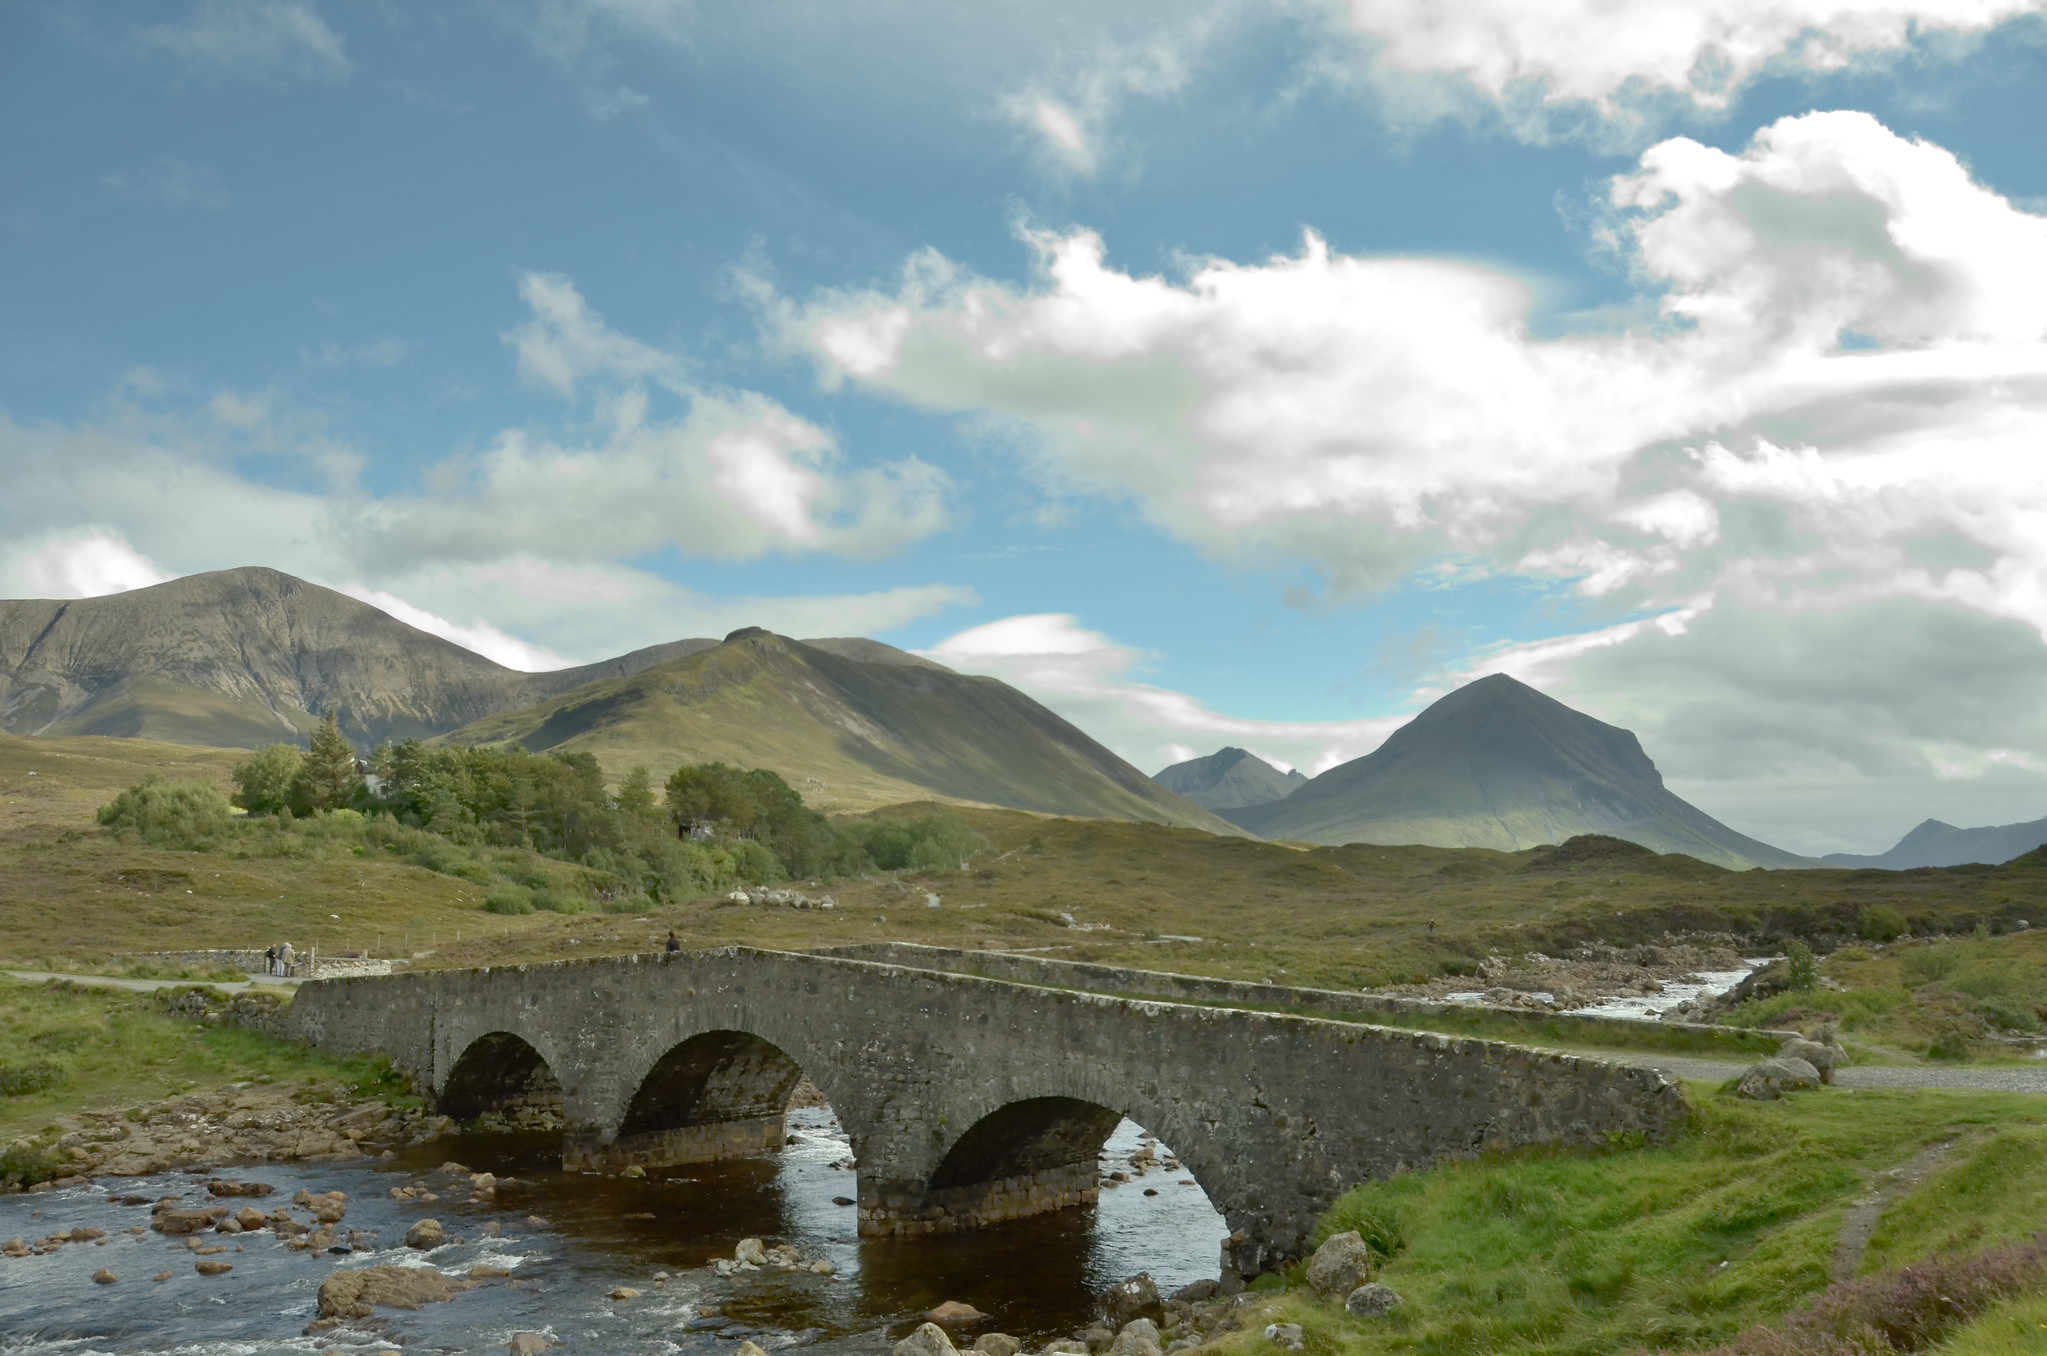 View of Sligachan Bridge, Skye with distant mountains in the background